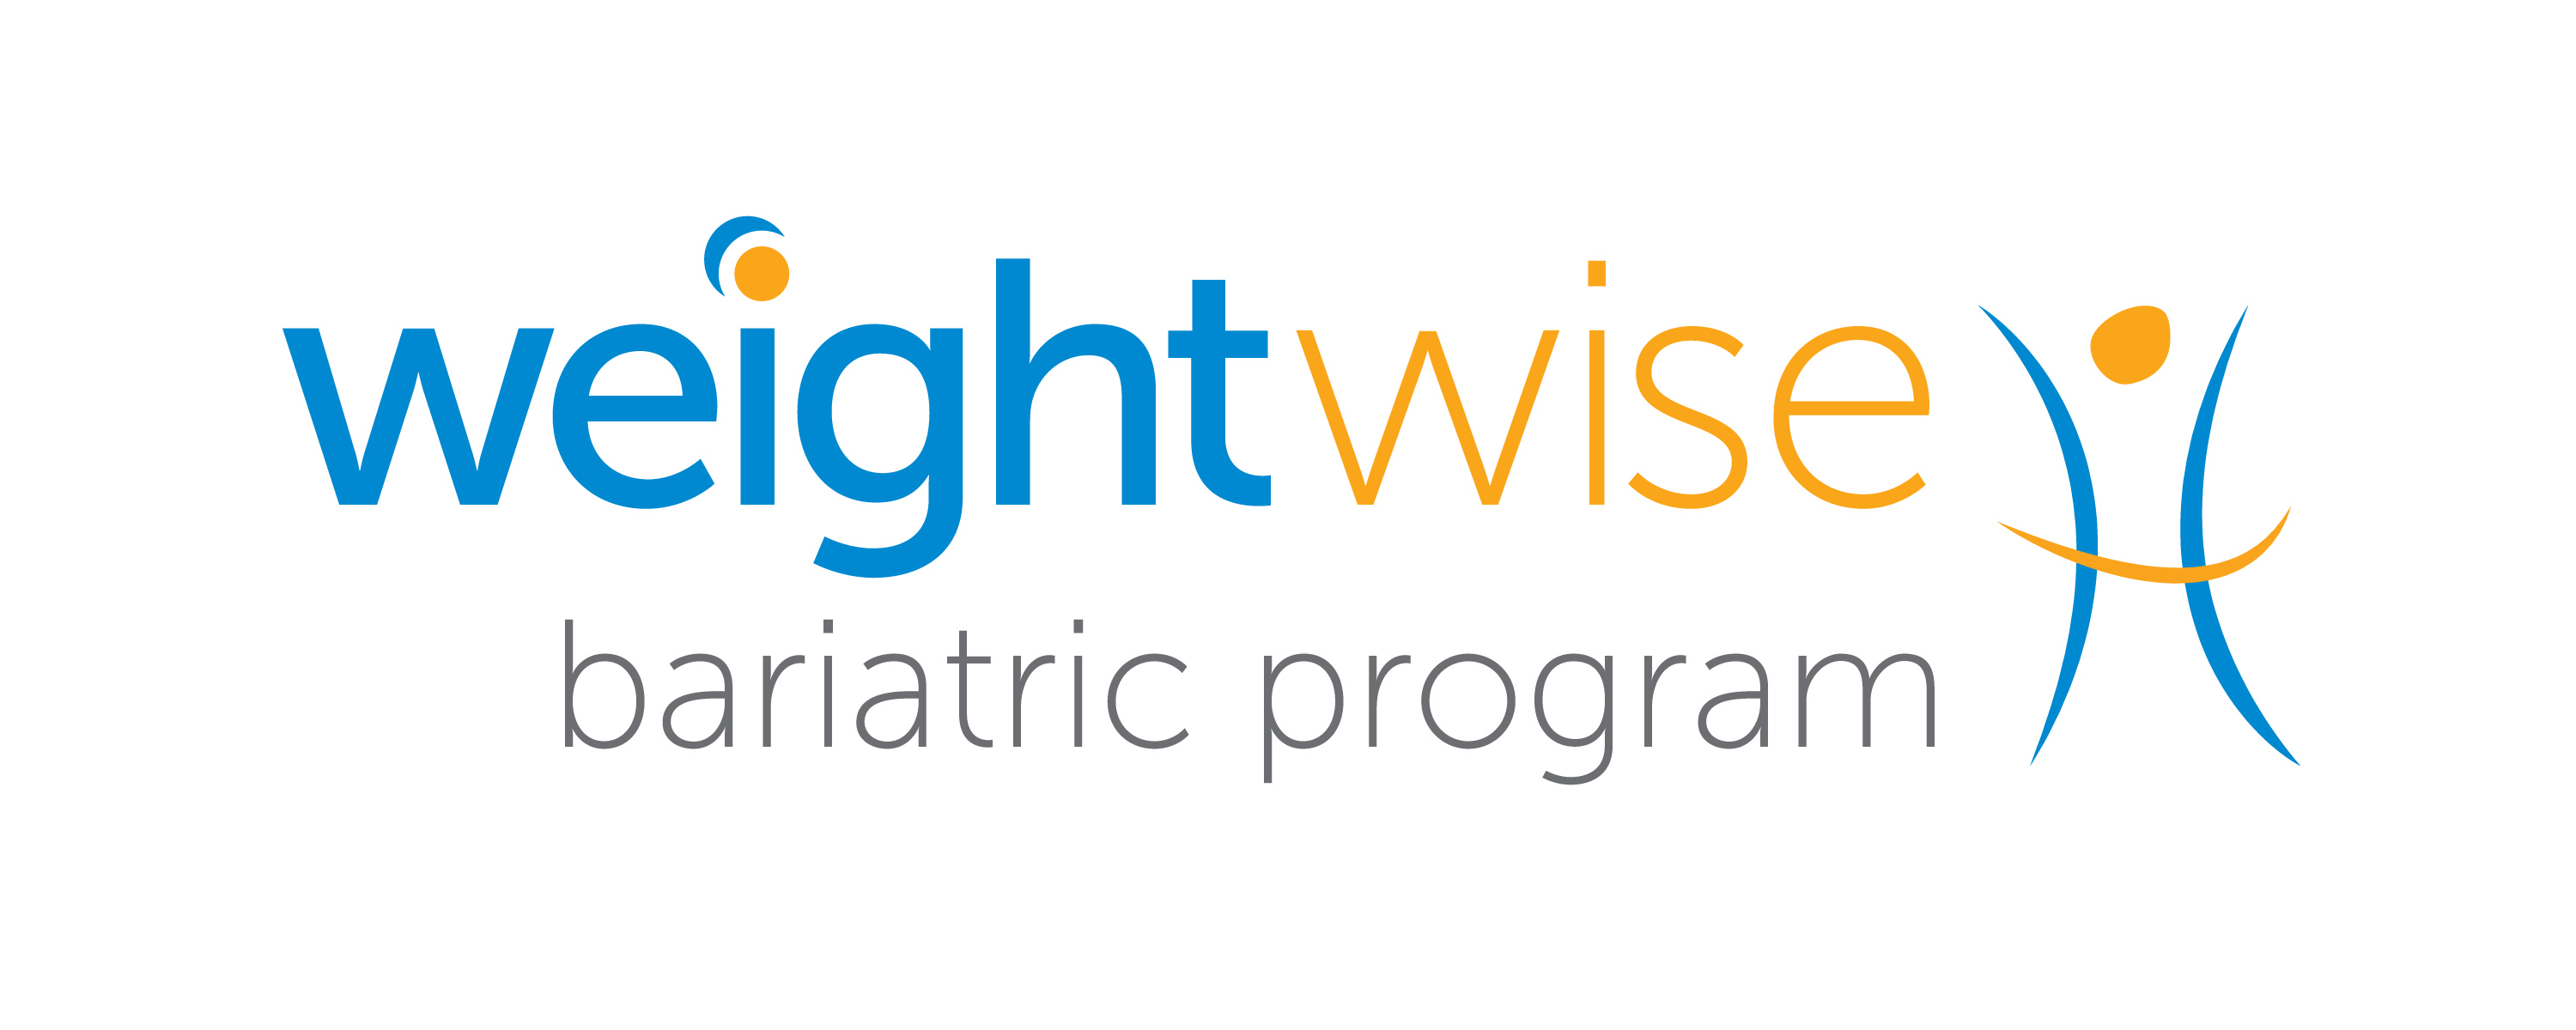 Weightwise Bariatric (Transforming Lives)